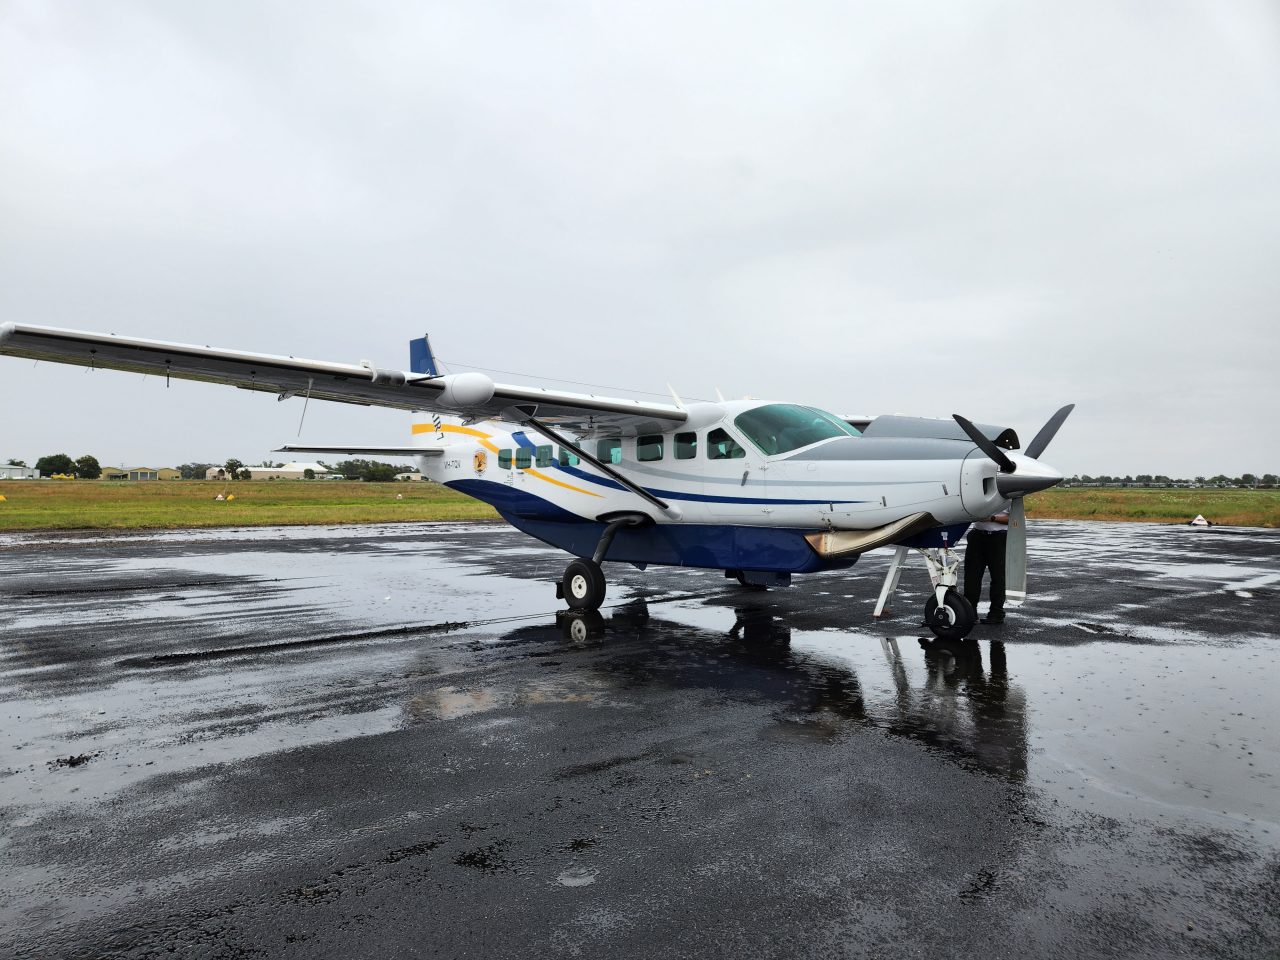 Photo of light aircraft parked on tarmac in a large puddle of water where splashing rain drops are visible.